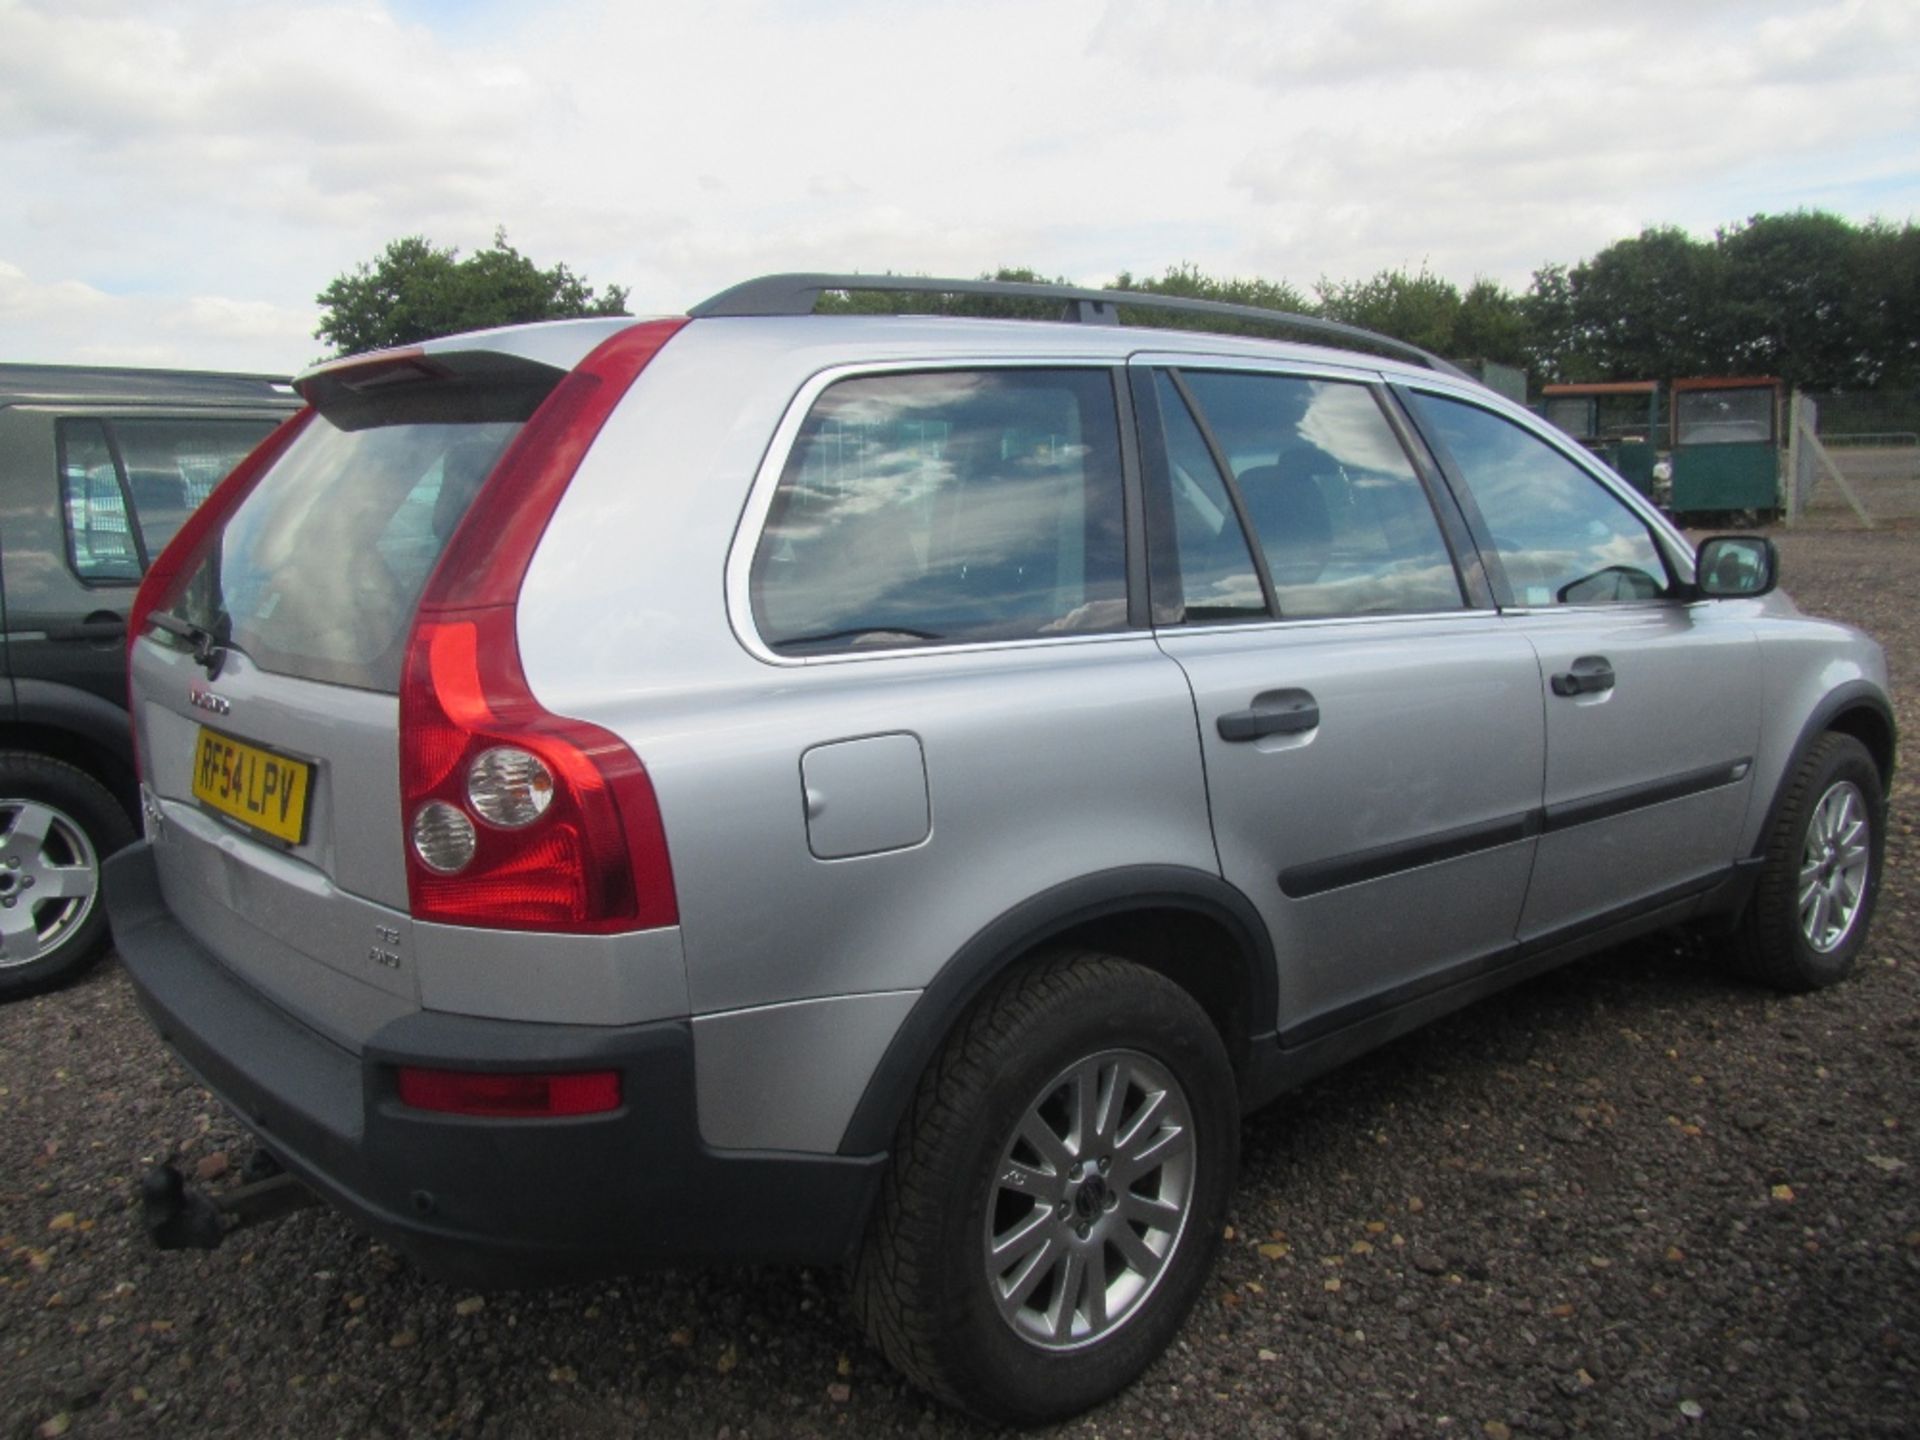 Volvo XC90 DS S 4wd Diesel with 7 Seats, 6 Speed Manual Gearbox, Alarm, Anti-Lock Brakes, Parking - Image 4 of 5